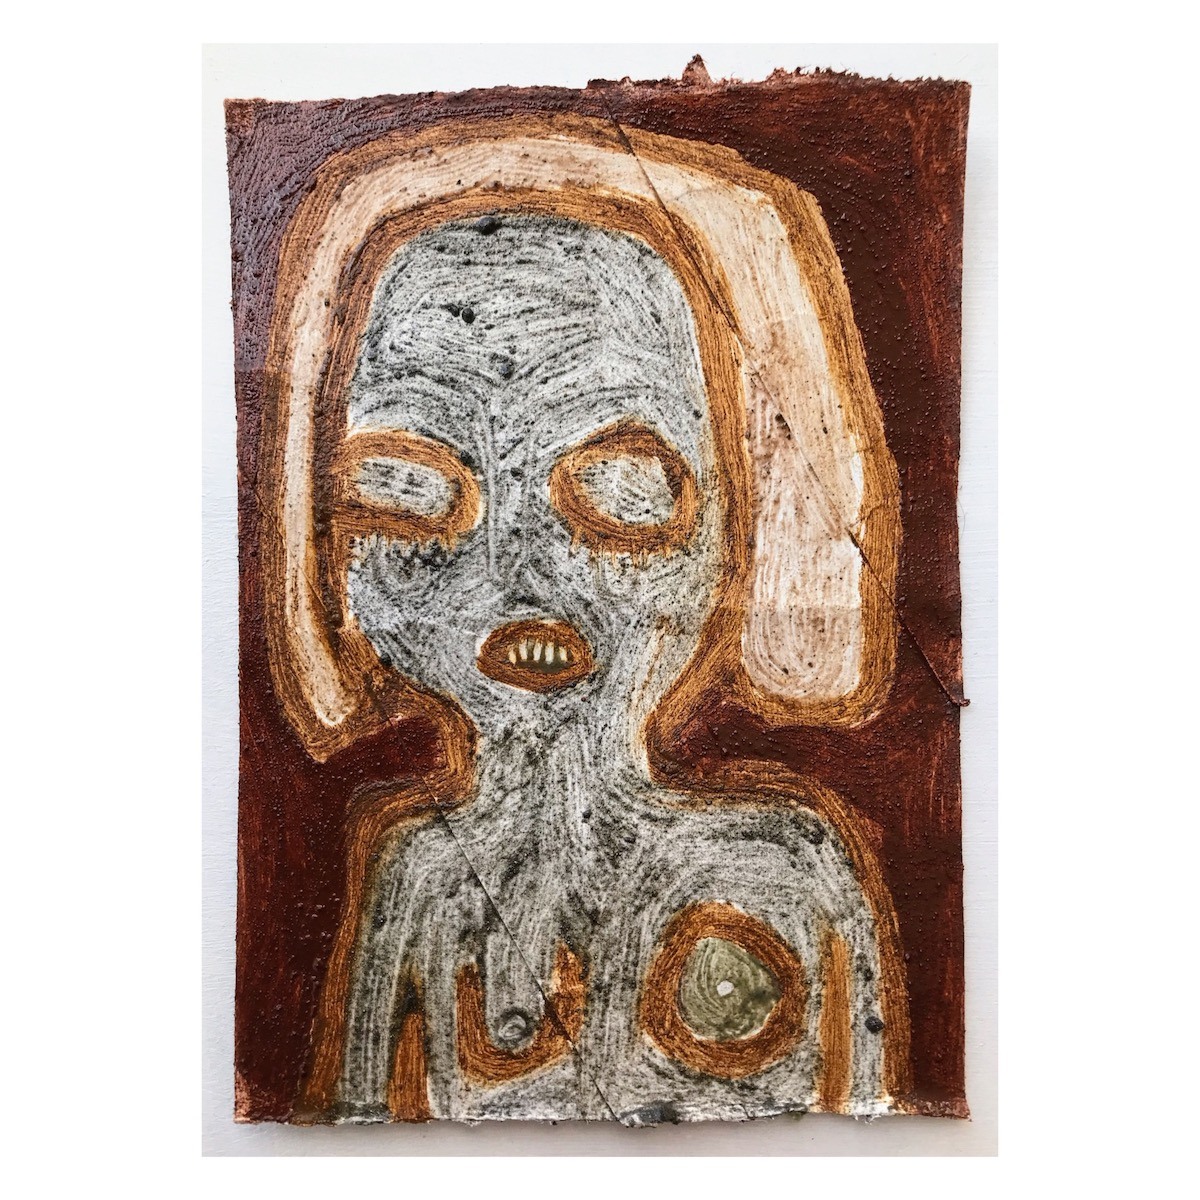 131 girl (Cornish earth pigments and linseed oil on primed salvaged card; 11x16cm)